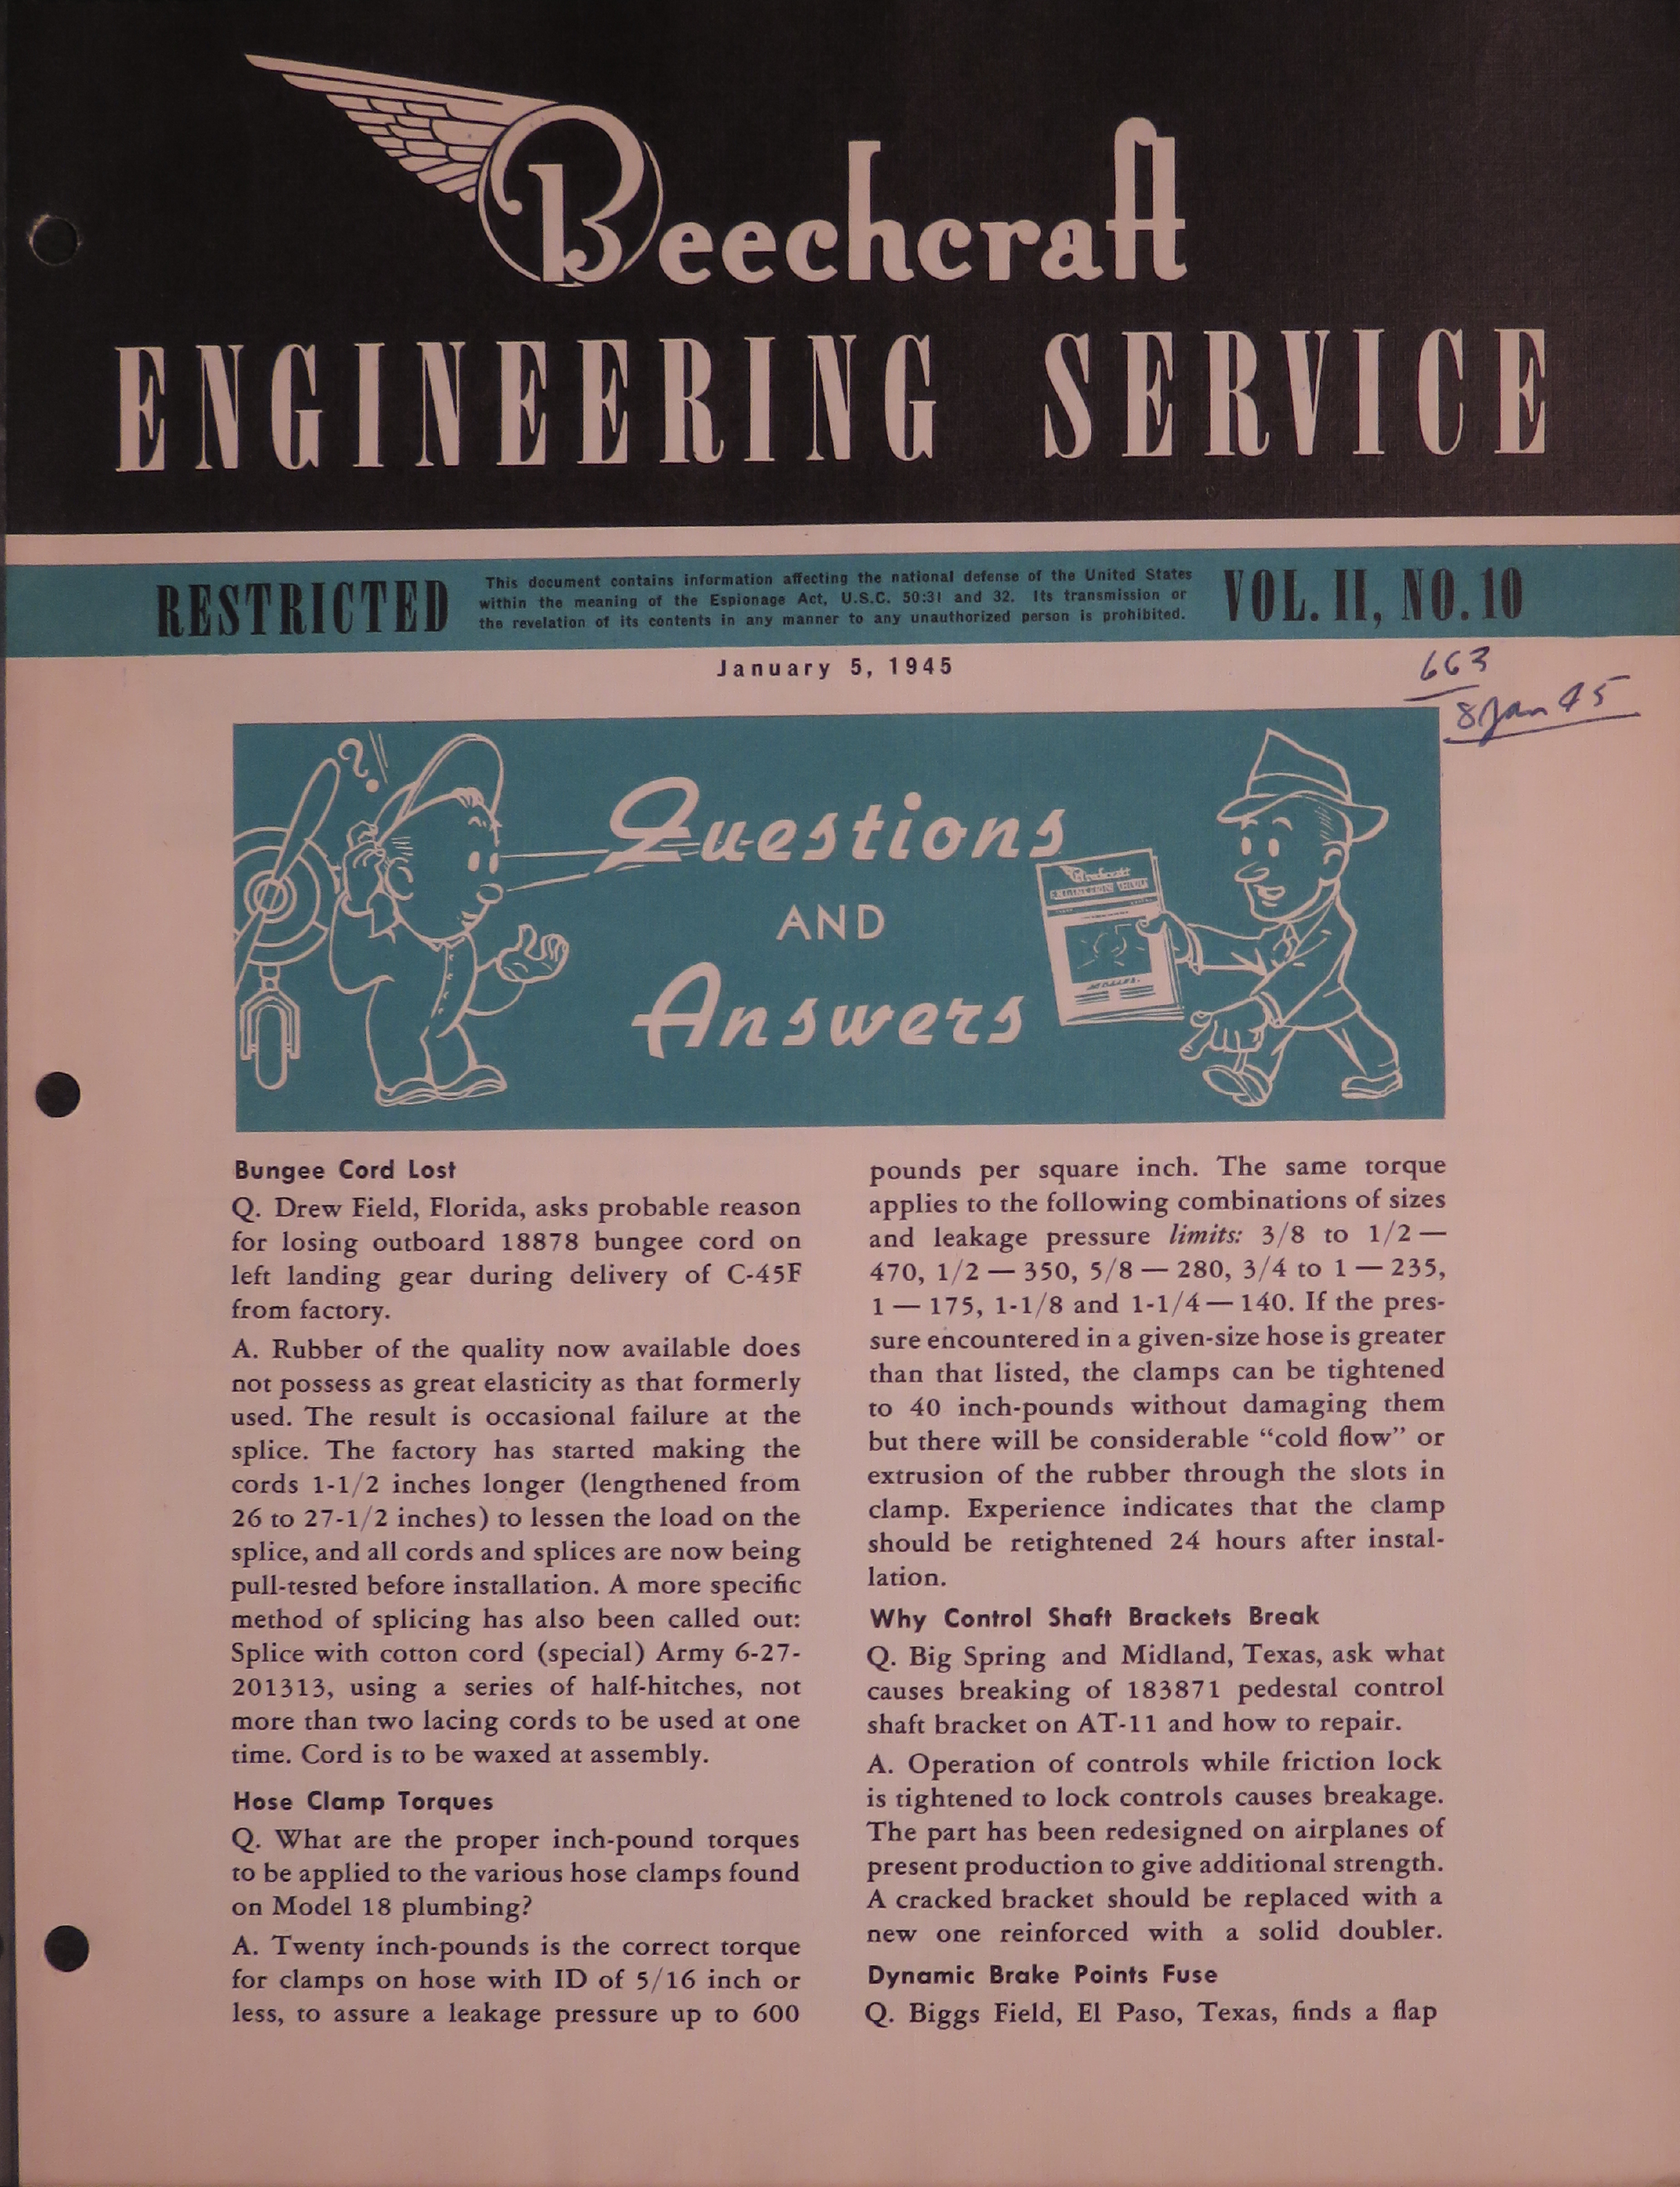 Sample page 1 from AirCorps Library document: Vol. II, No. 10 - Beechcraft Engineering Service